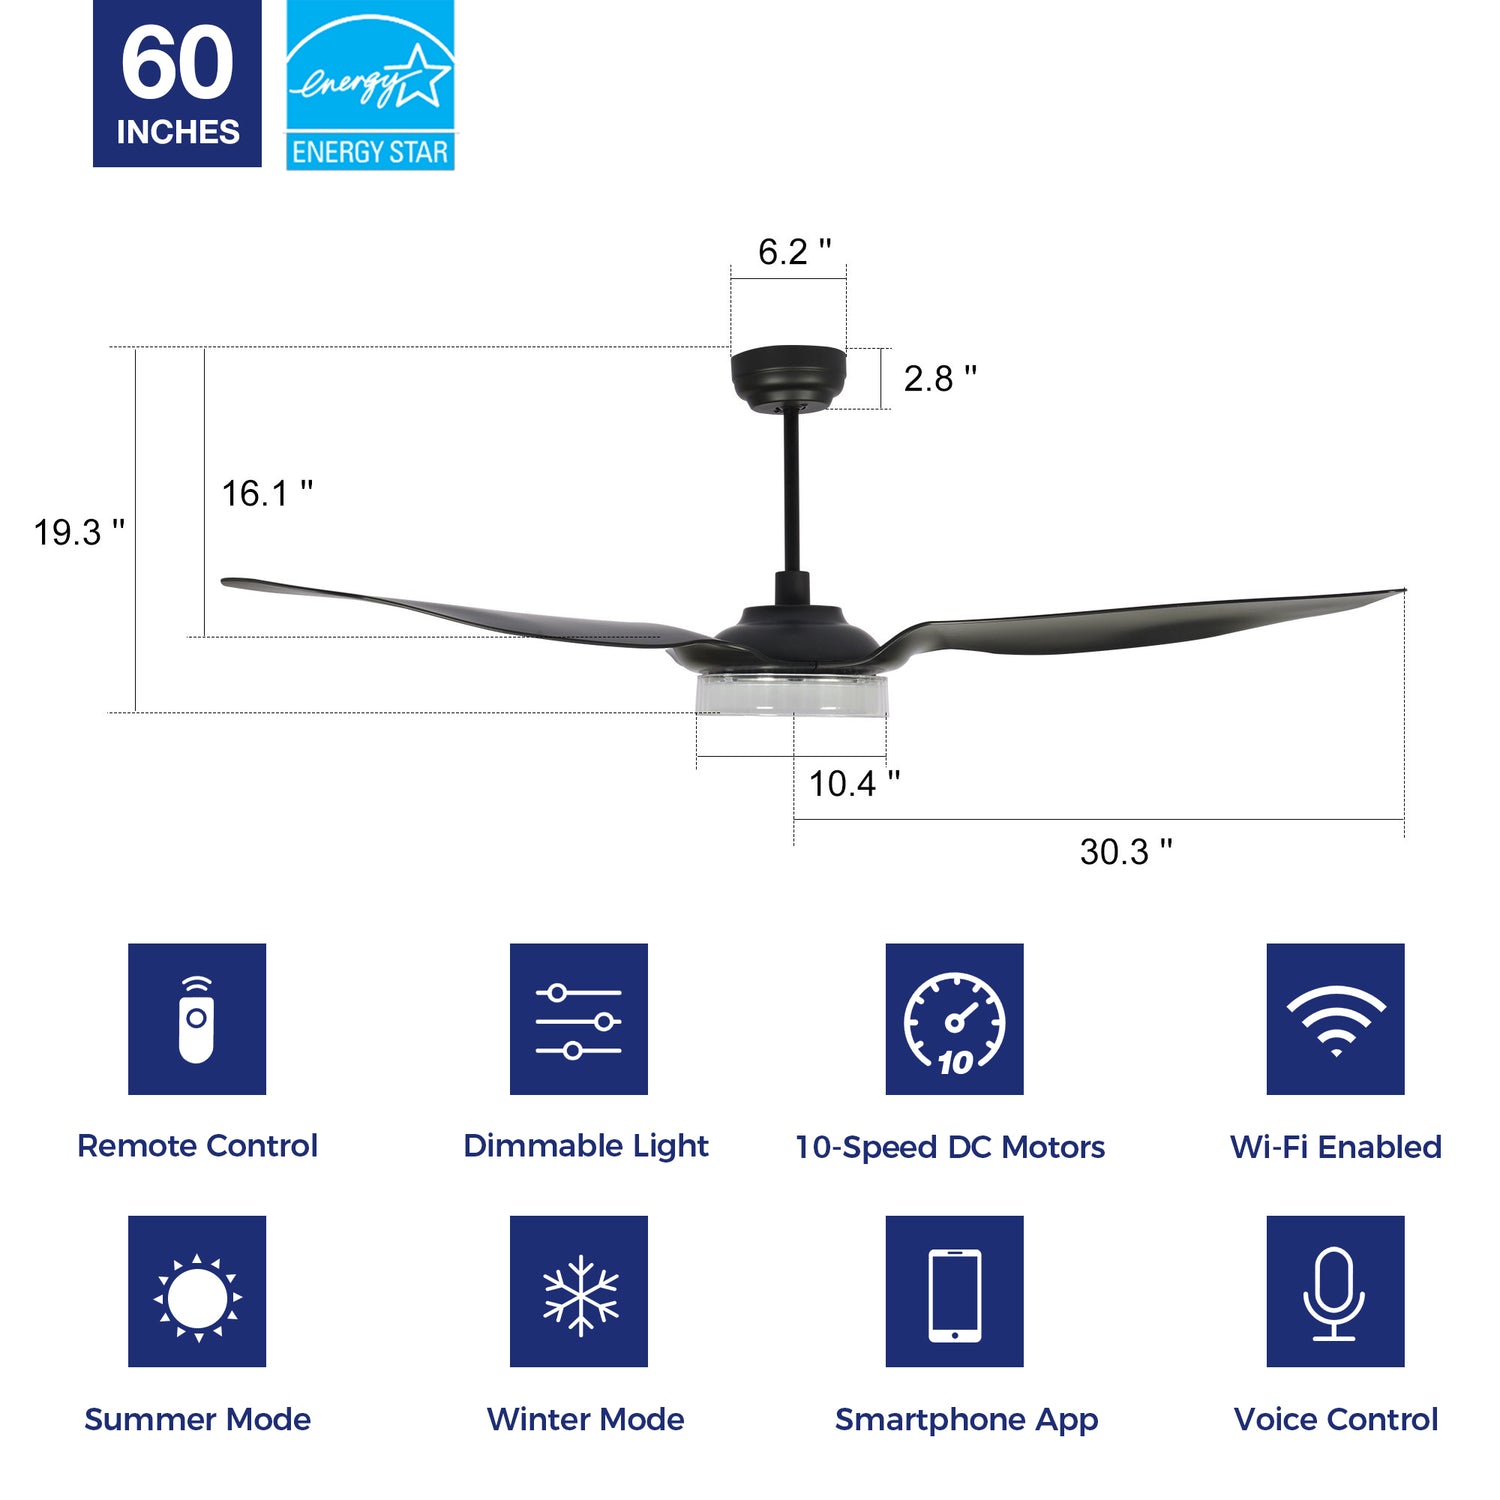 Icebreaker Outdoor 60-inch Smart Ceiling Fan with LED Light Kit-black Case and black Abs Fan Blades. The fan features Remote control, Wi-Fi apps, and Voice control technology (compatible with Amazon Alexa and Google Home Assistant ) to set fan preferences. Equipped with 3000-lumen dimmable LED lights and a 10-speed DC Motor (7000CFM airflow output), it brings you cool and bright. 